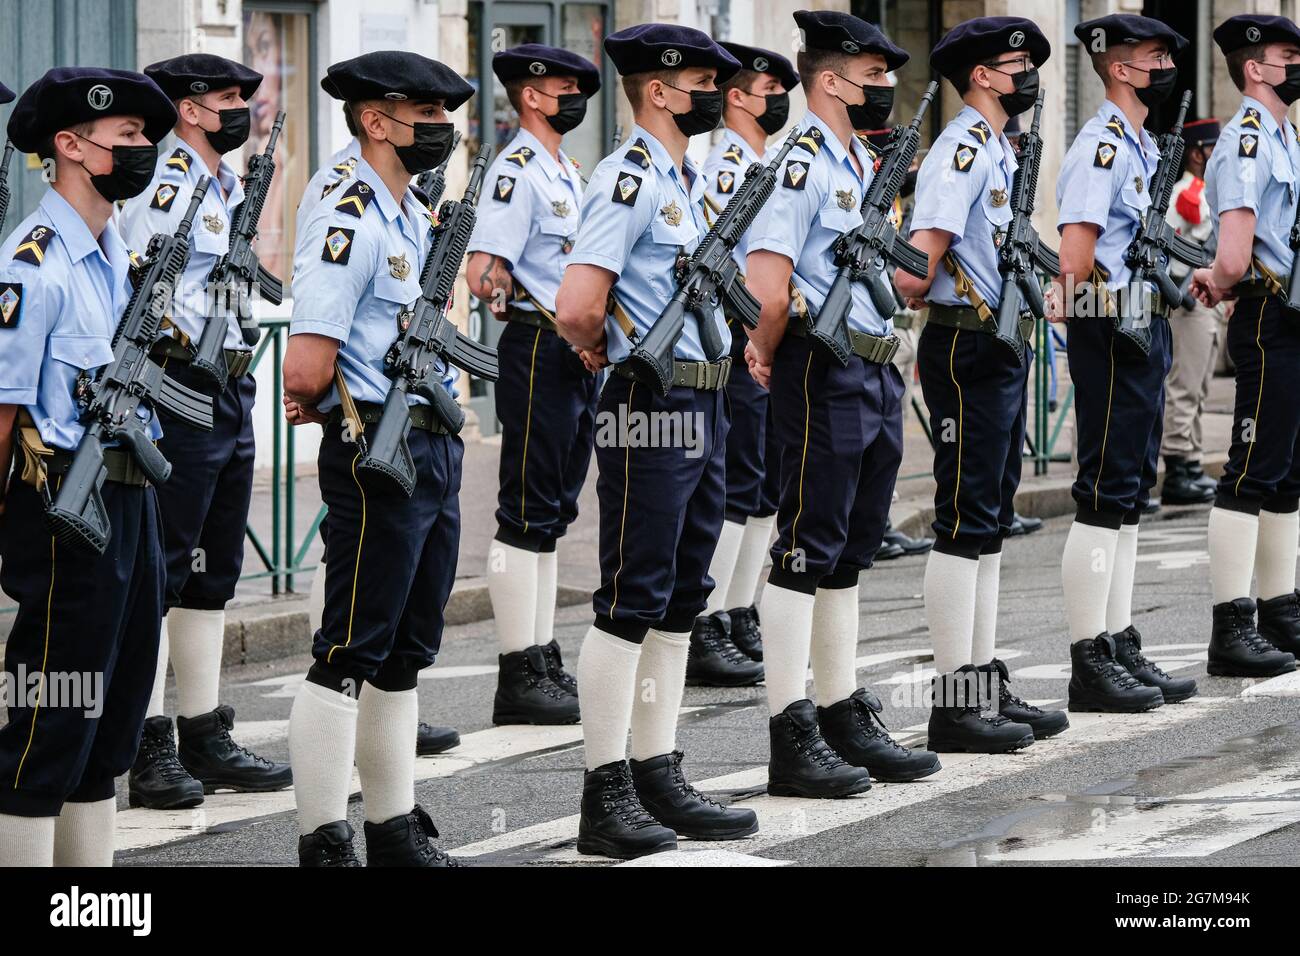 Lyon (France), July 14, 2021. Military parade for the bank holidays of 14 July around the Place Bellecour in Lyon. Stock Photo